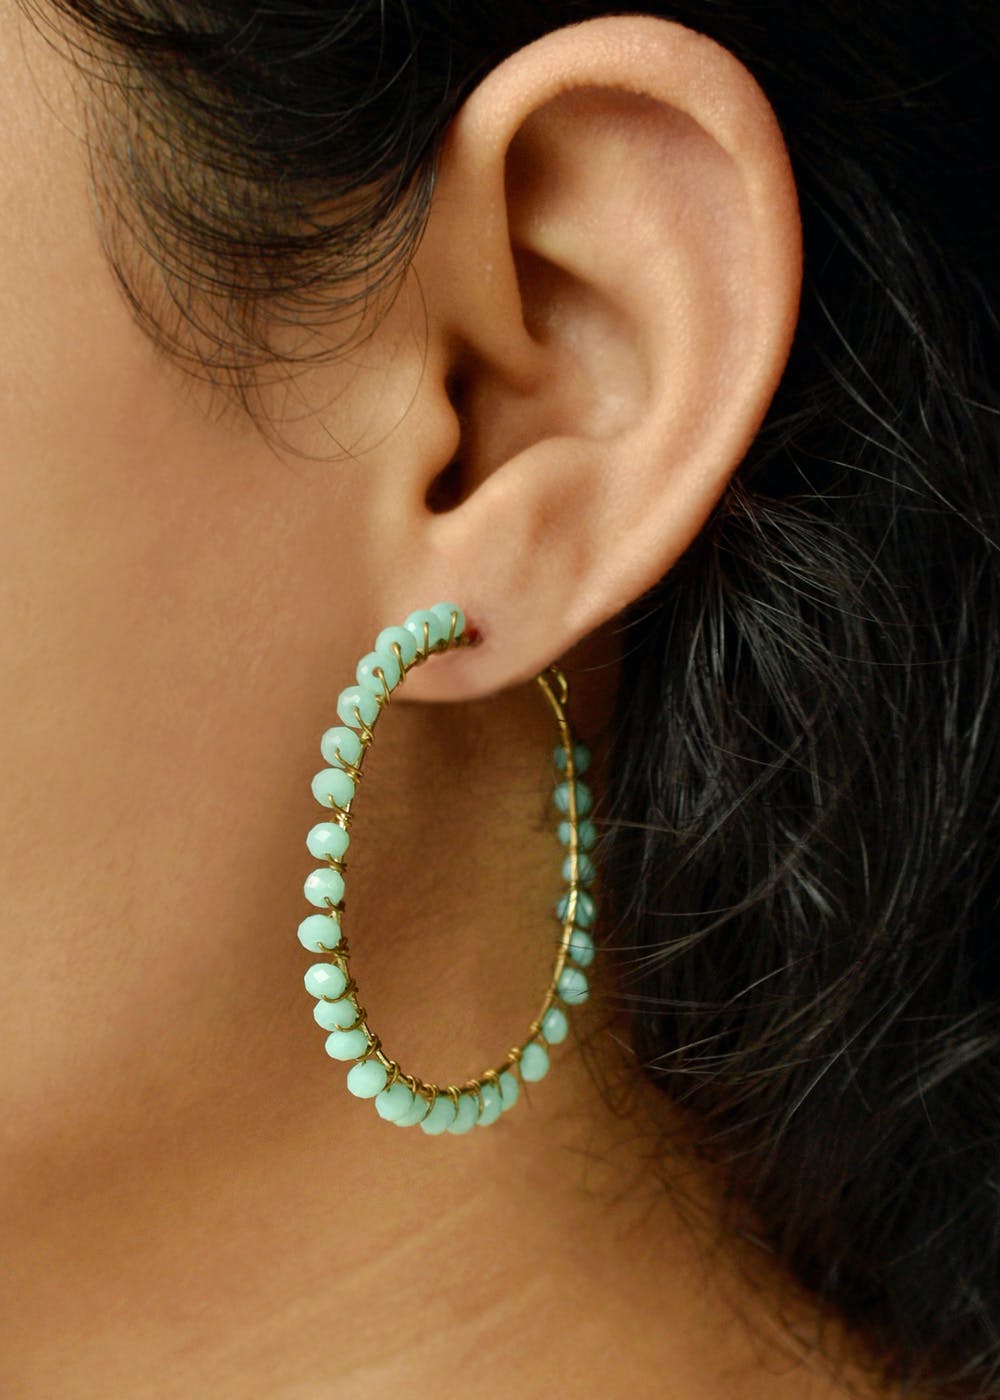 15 Hairstyles to Show off Your Statement Earrings